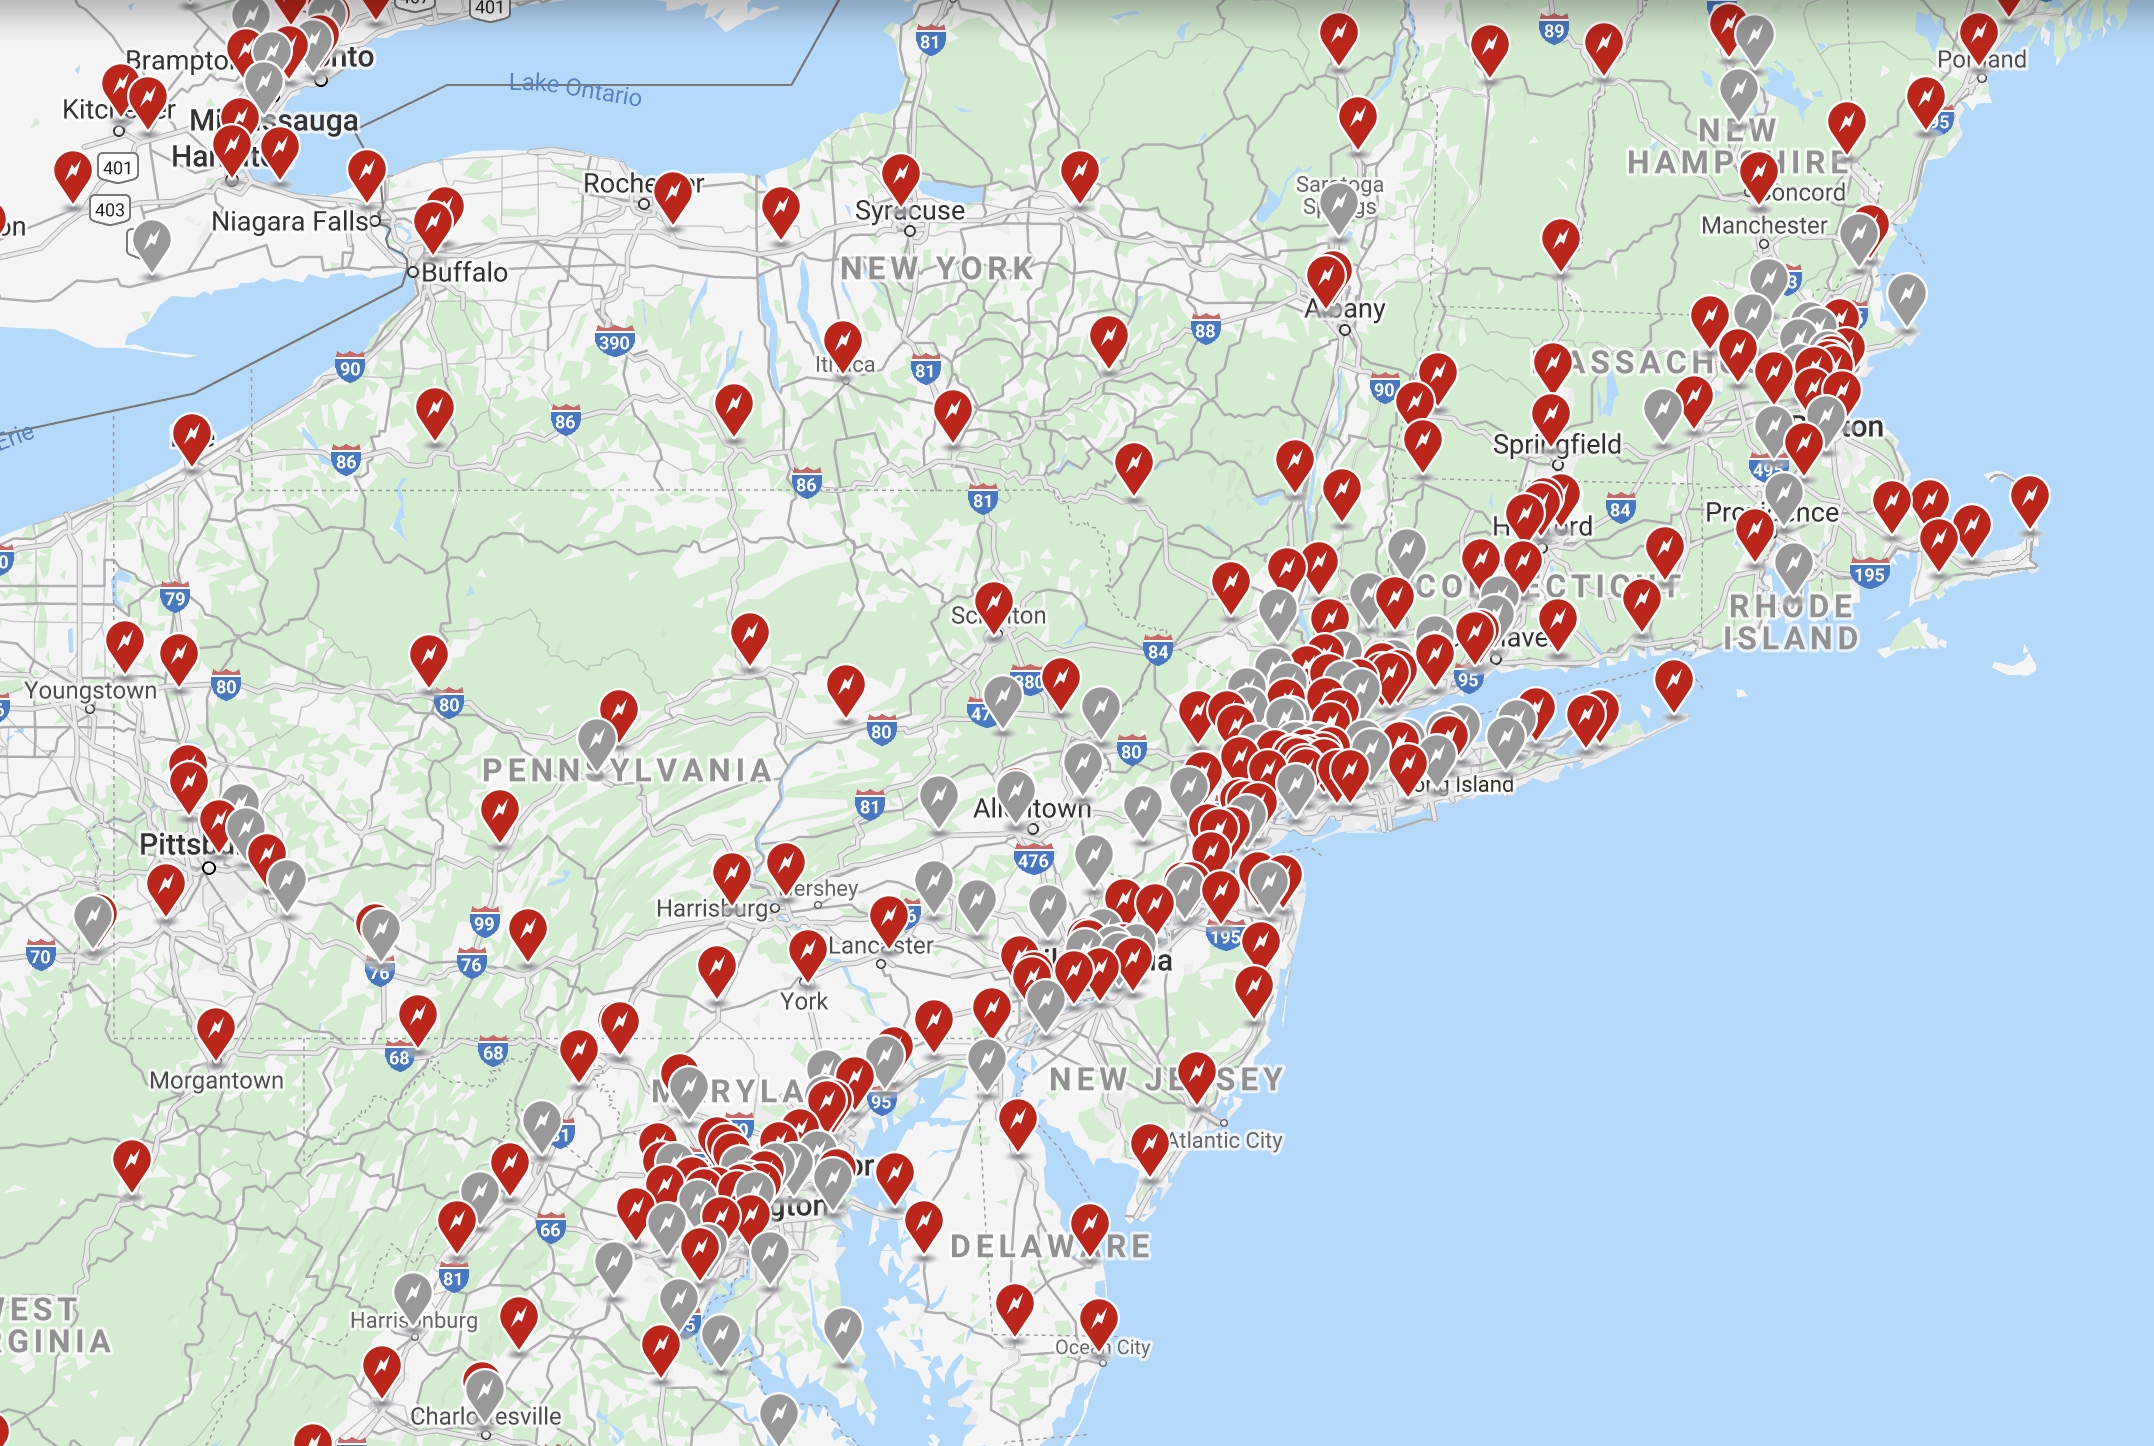 Tesla unveils new map of Supercharger stations, adds stations